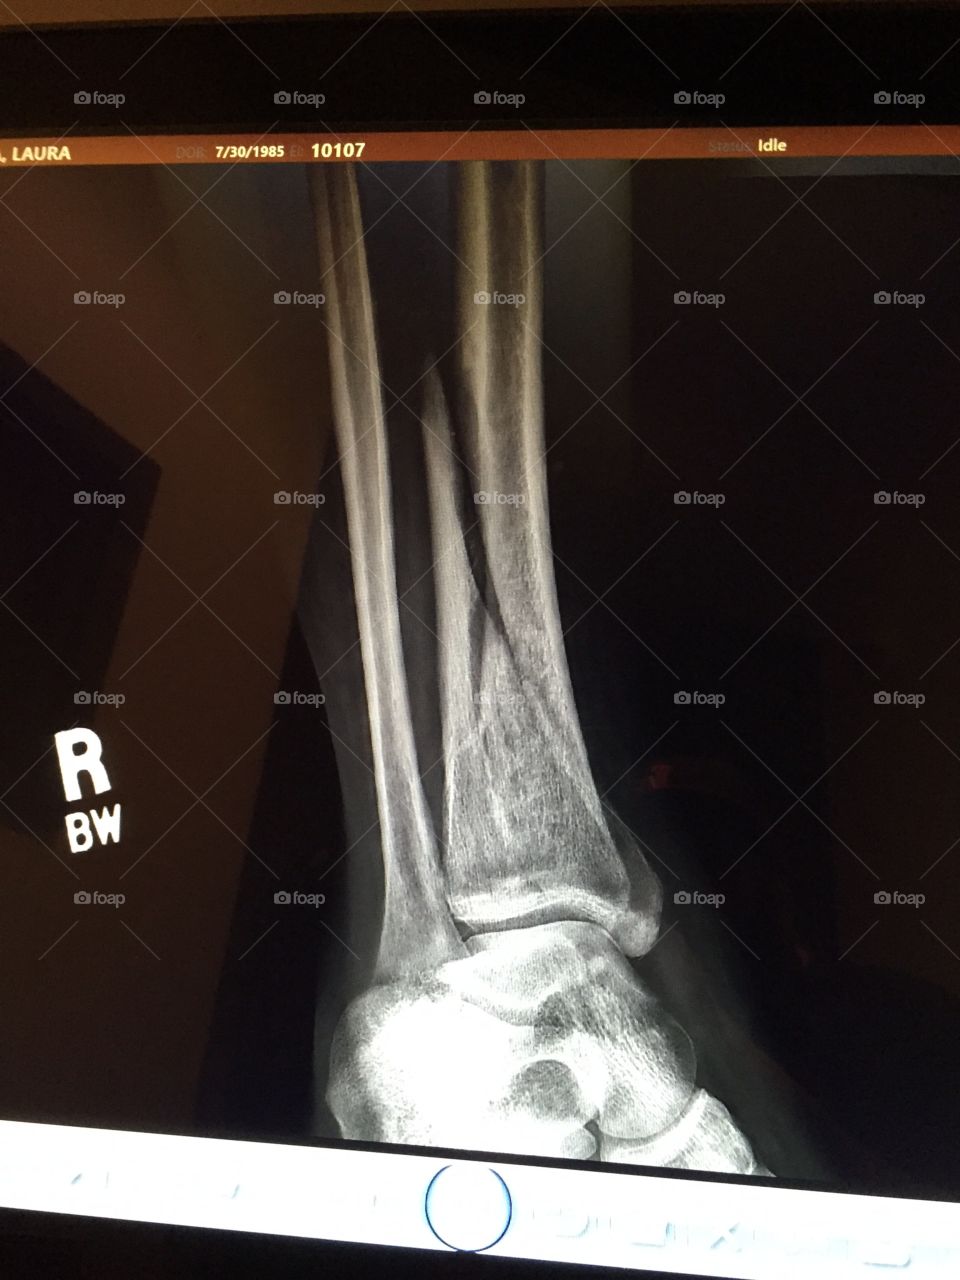 X-ray. Look at my fracture .. It's healing 